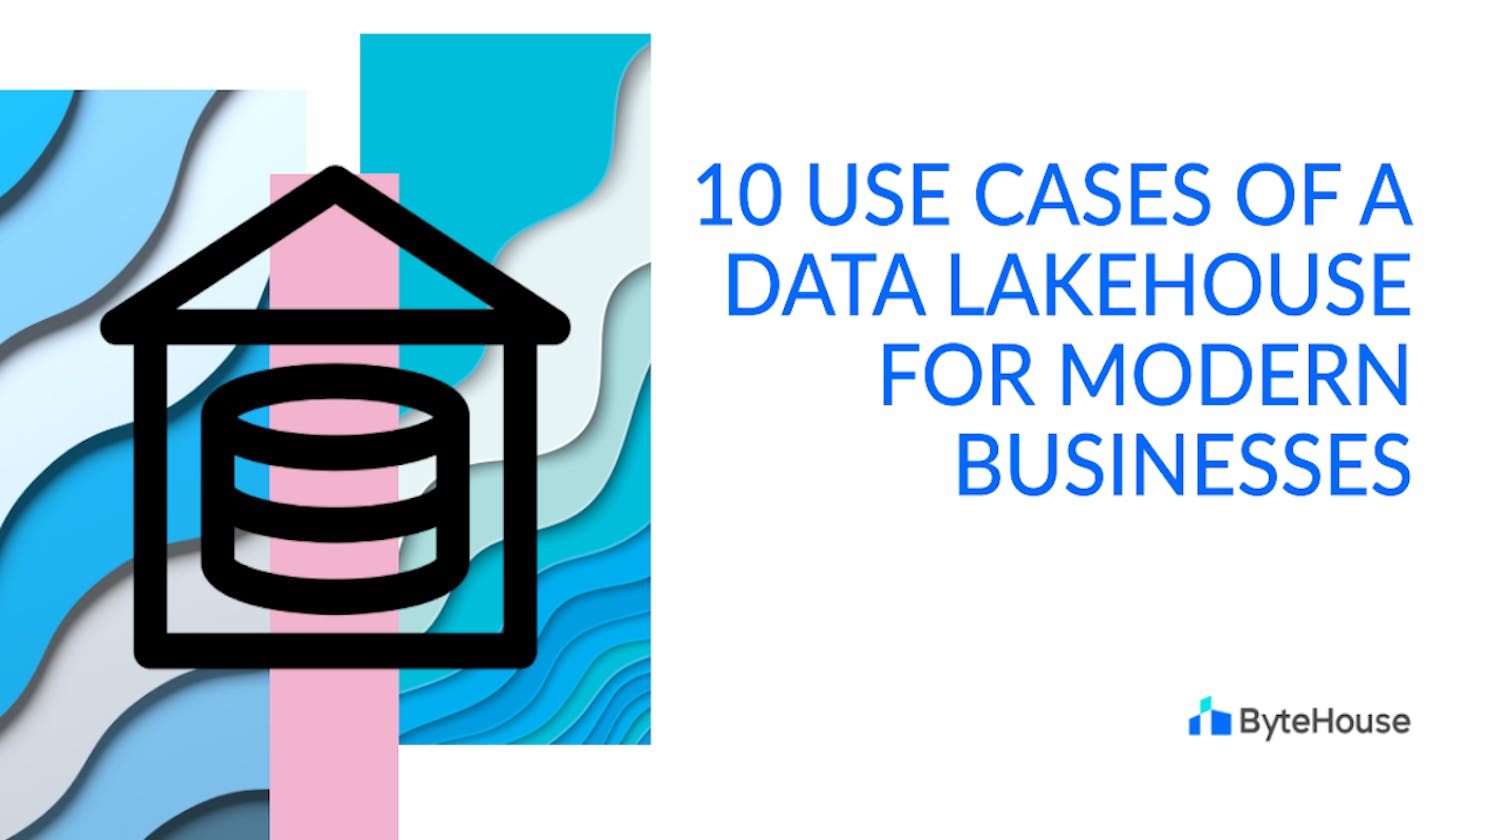 10 use cases of a data lakehouse for modern businesses